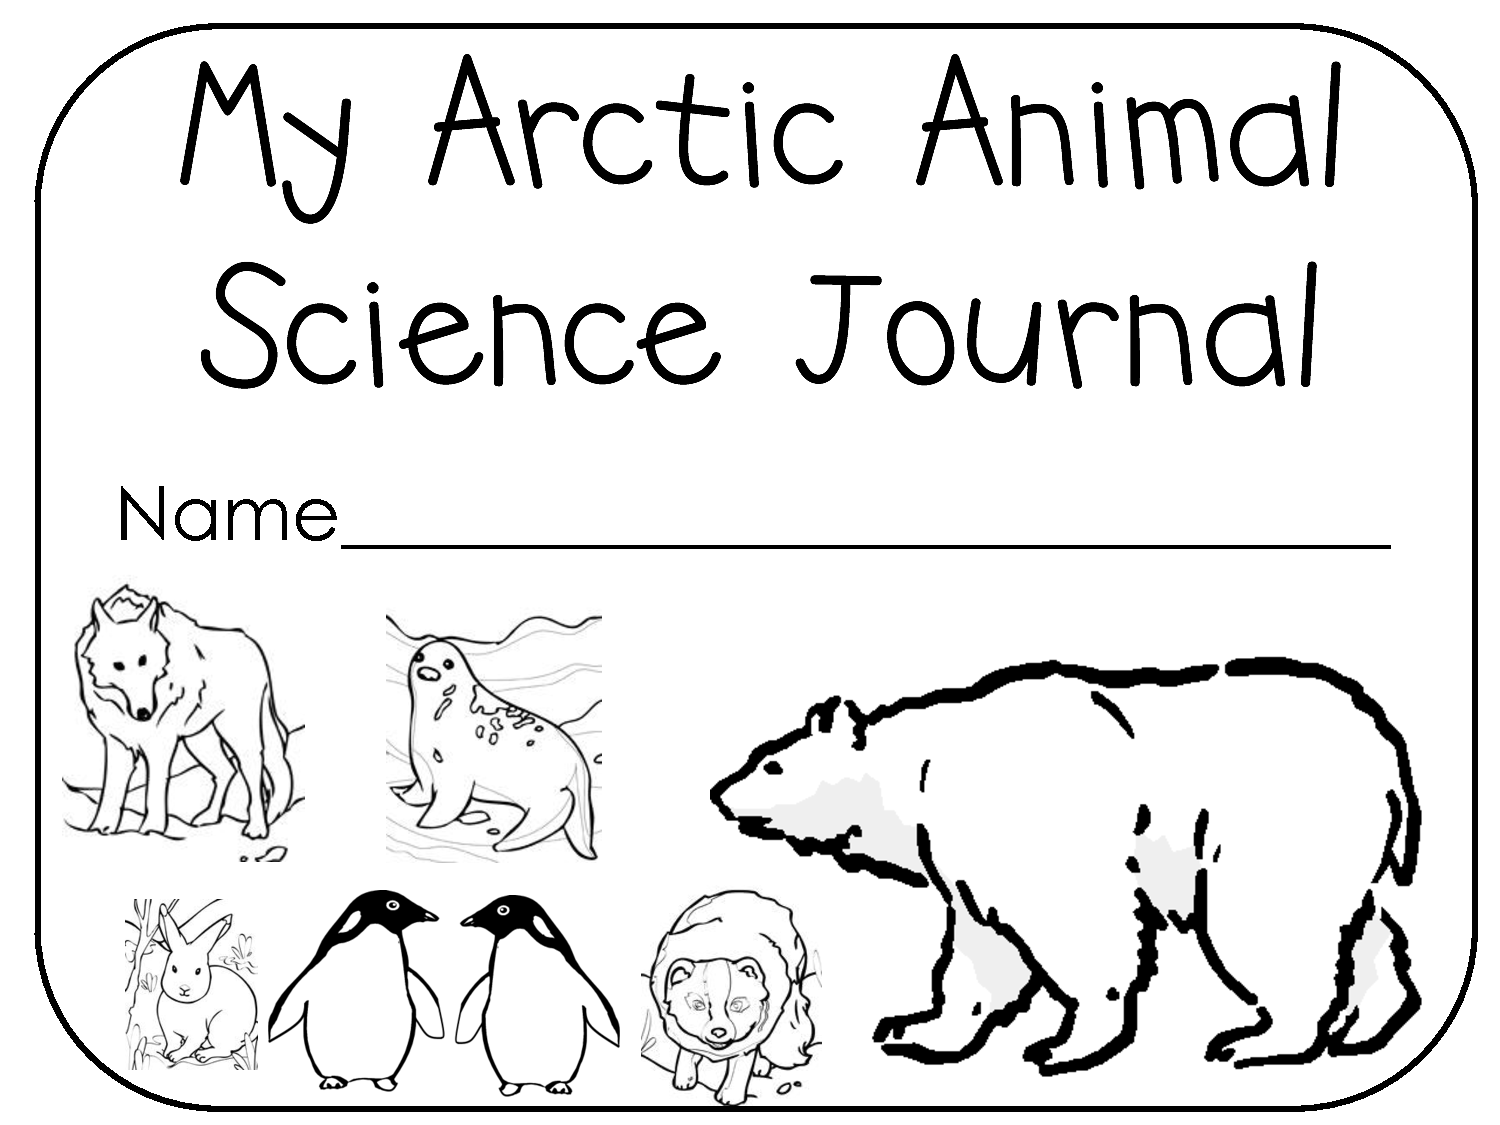 Arctic Animals Coloring Pages | Coloring Pages for Kids